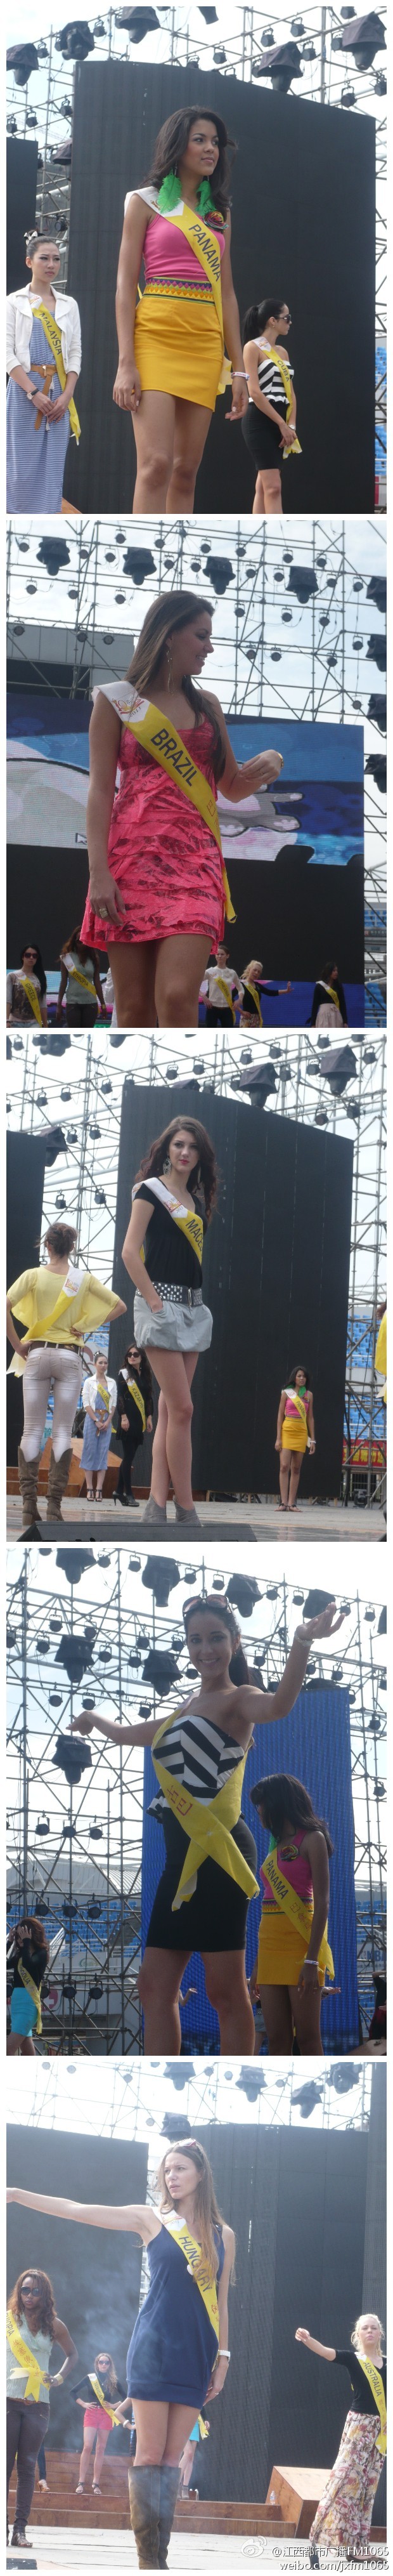 Miss Tourism Queen of the Year International 2011-India won! - Page 2 7996af1djw1dmr092lvwvj